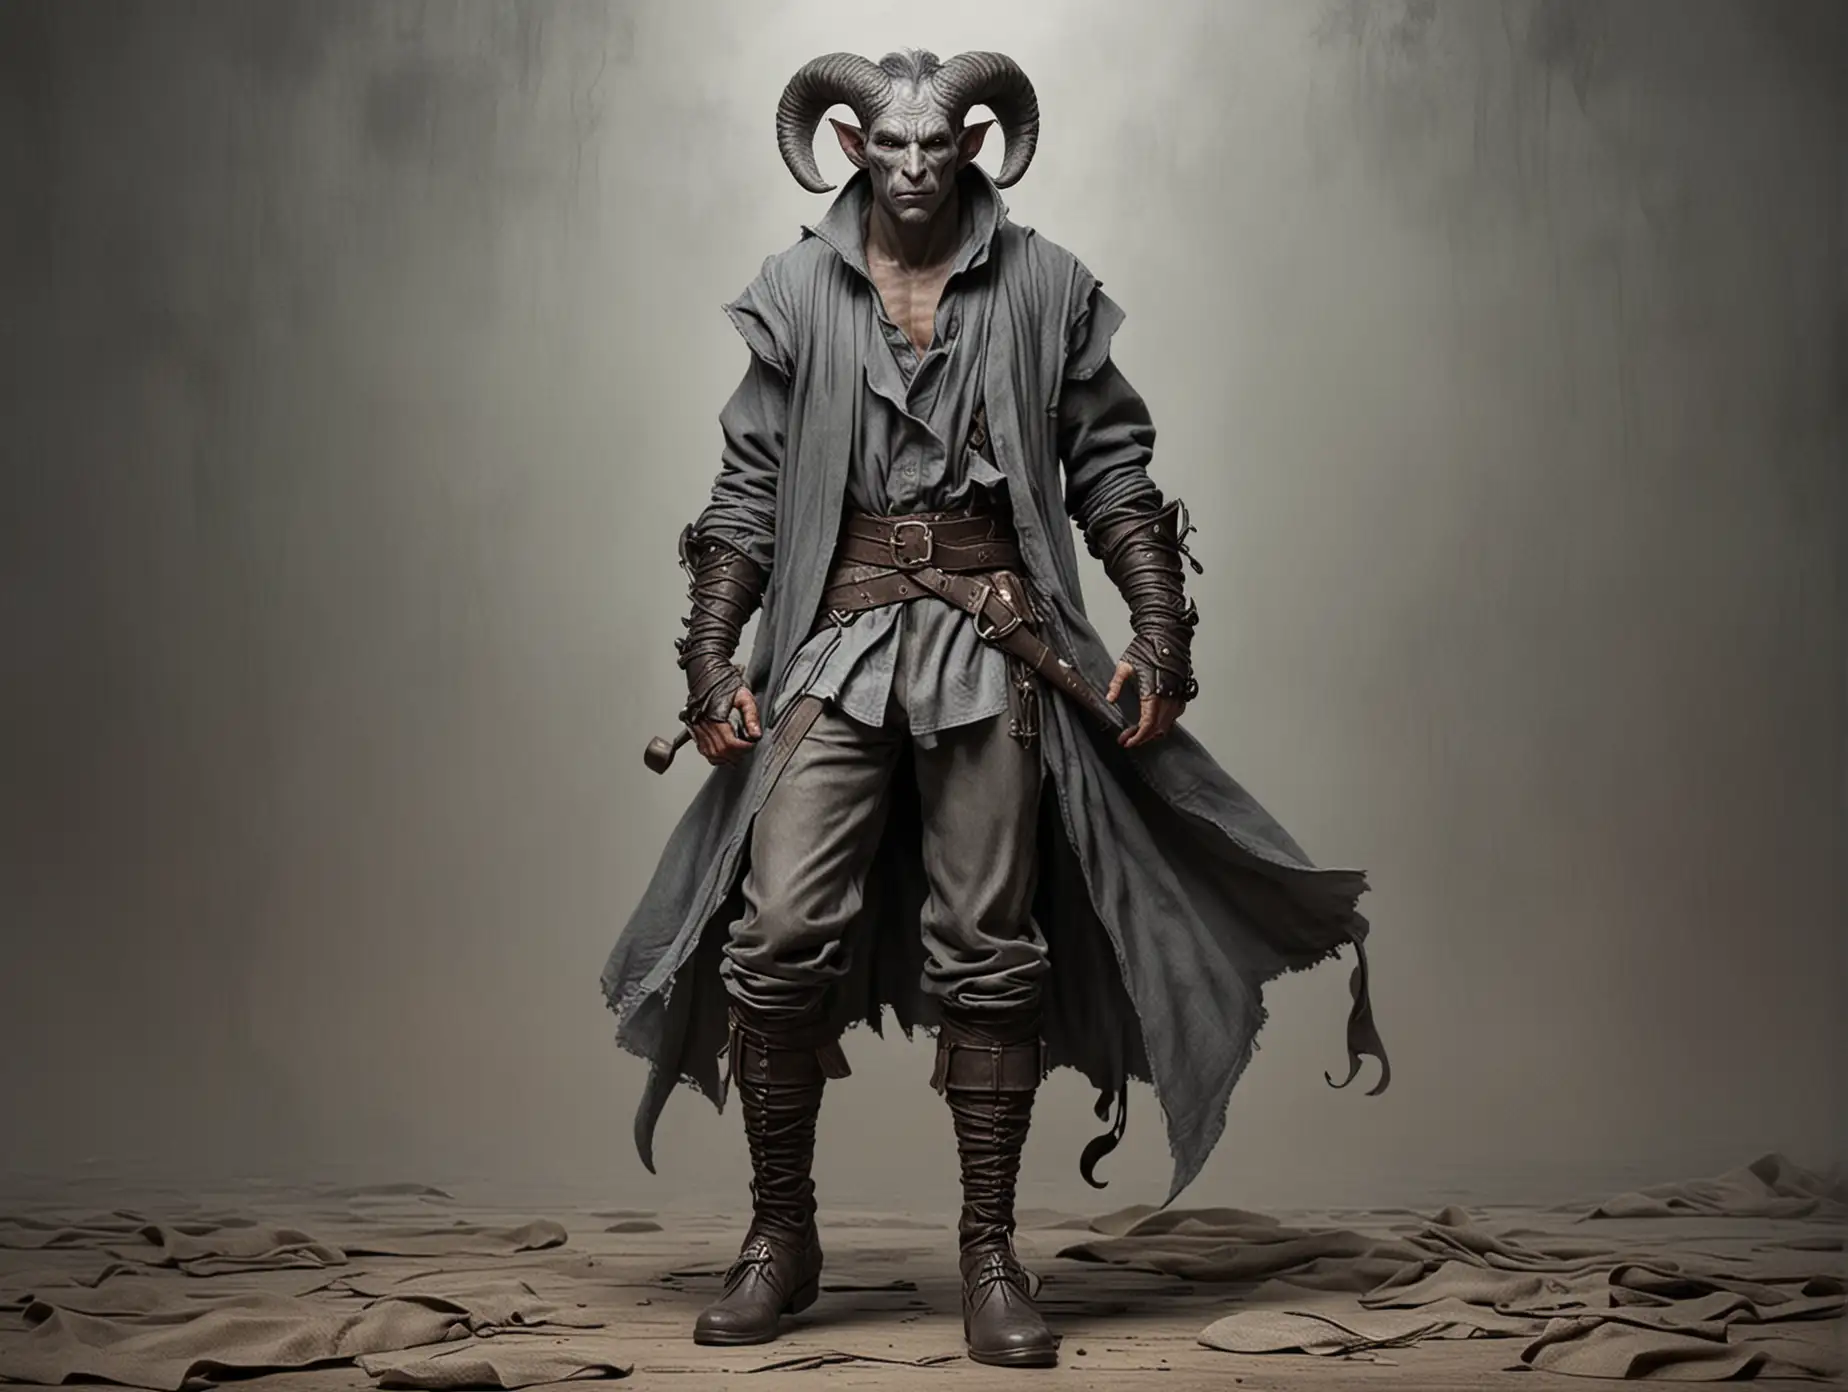 A Tiefling man in grey rags with grey shoes